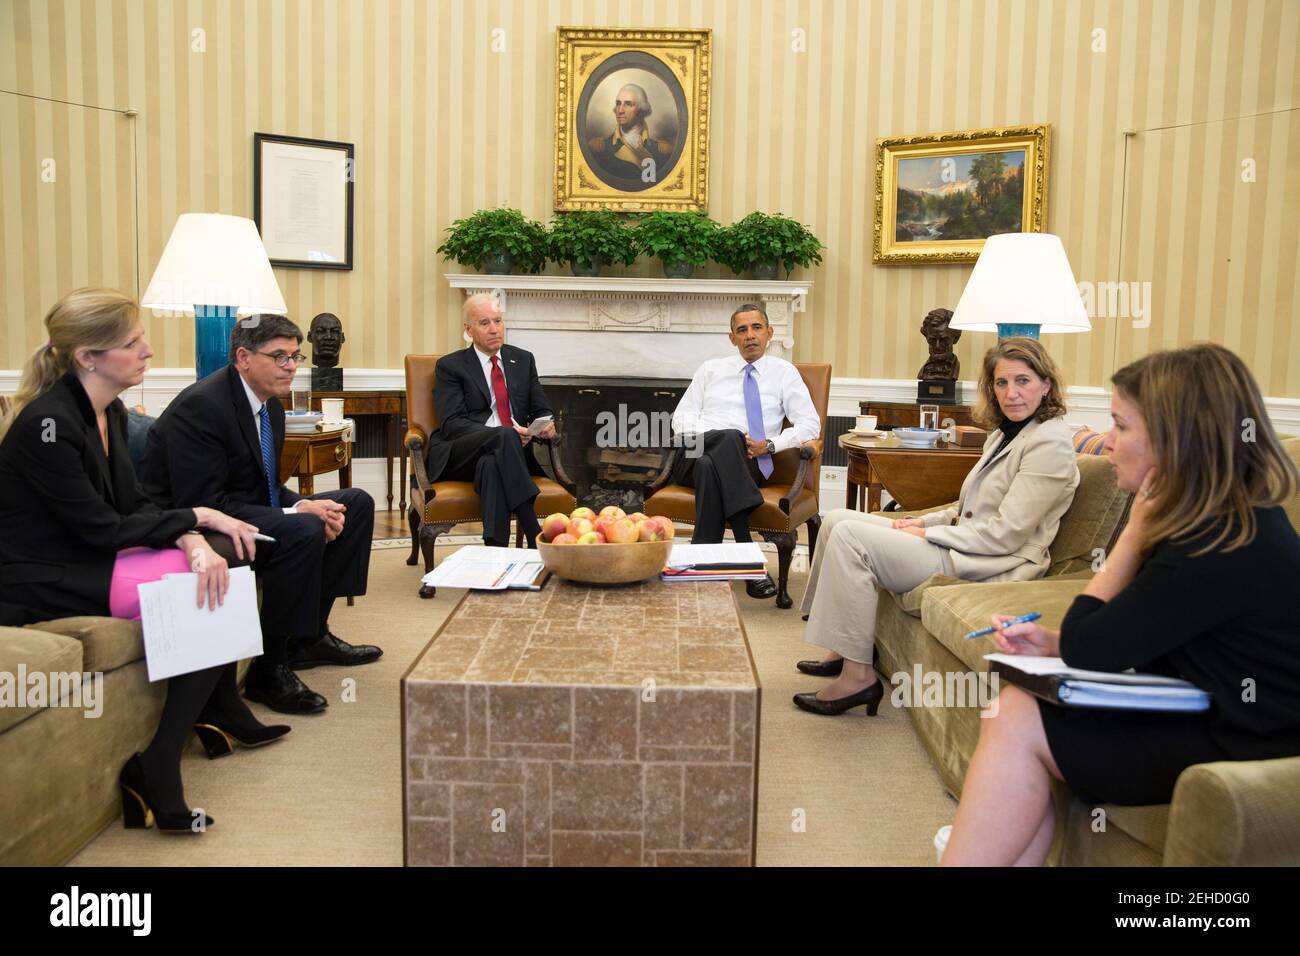 President Barack Obama and Vice President Joe Biden listen as they are updated on the federal government shutdown and the approaching debt ceiling deadline, in the Oval Office, Oct. 1, 2013. From left, Kathryn Ruemmler, Counsel to the President, Treasury Secretary Jack Lew, Sylvia Mathews Burwell, Director of OMB, and Alyssa Mastromonaco, Deputy Chief of Staff. Stock Photo